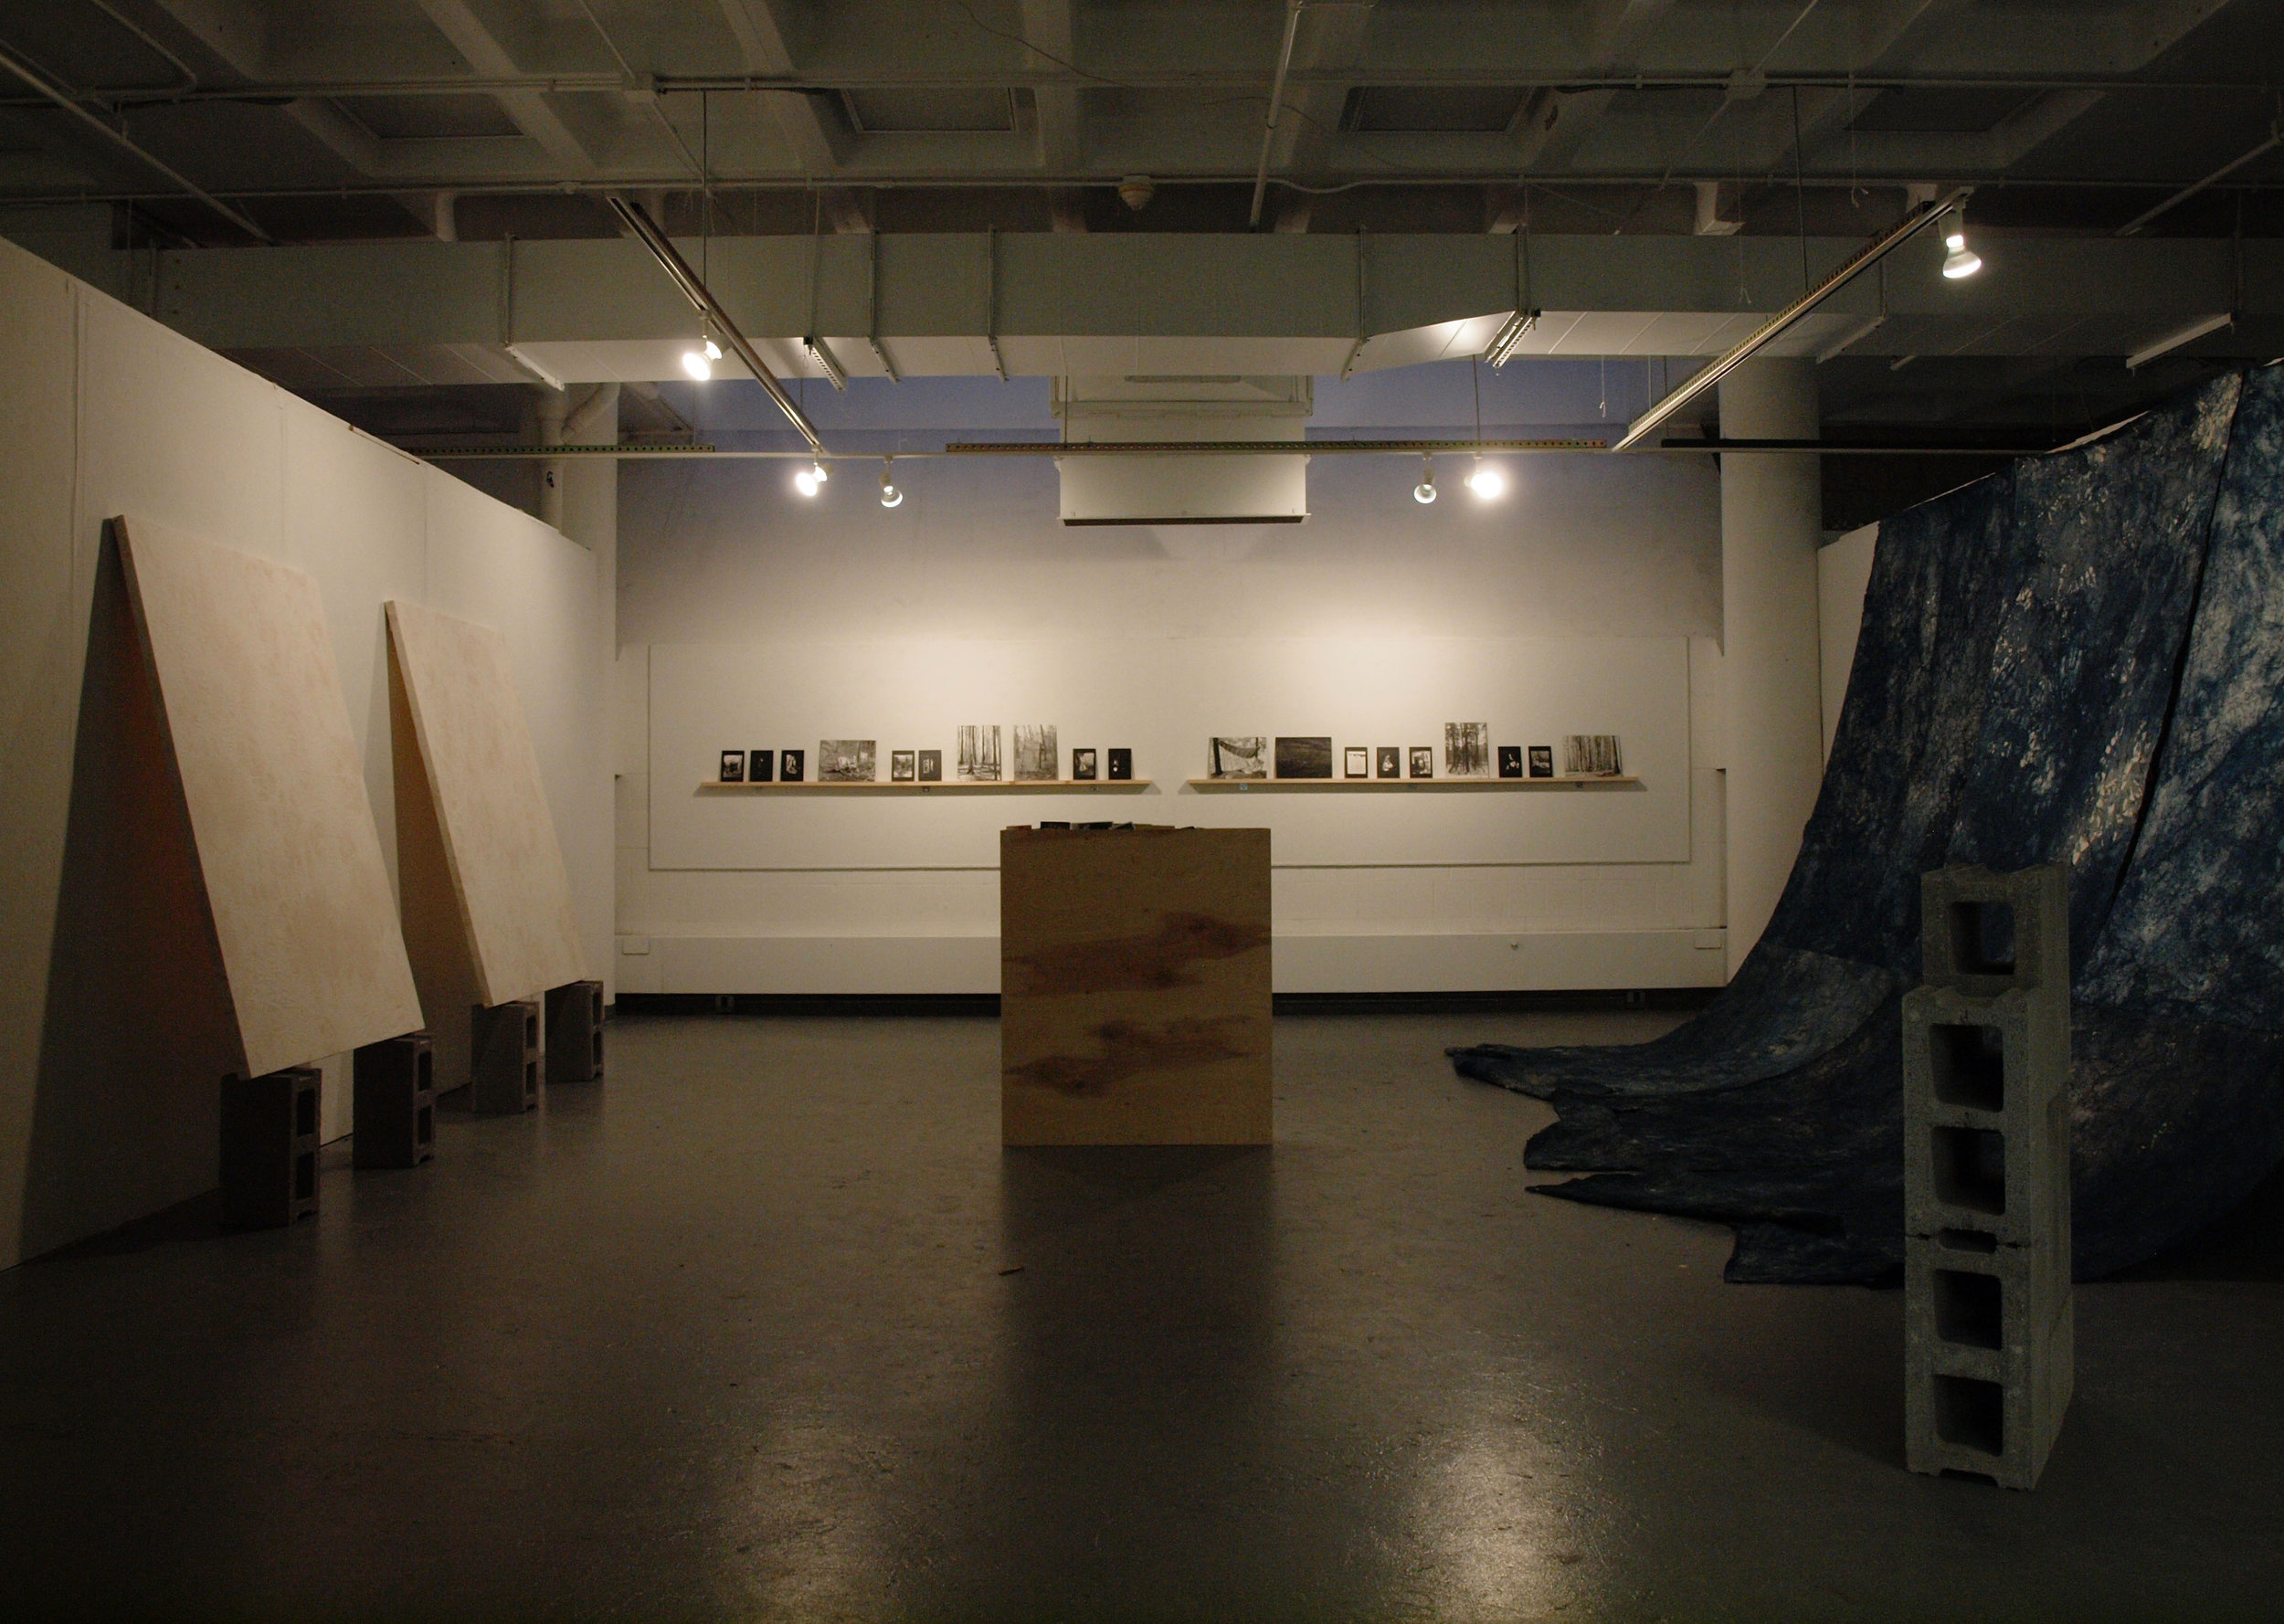  2014, installation view at Alfred University, paintings by Claire Morgos 